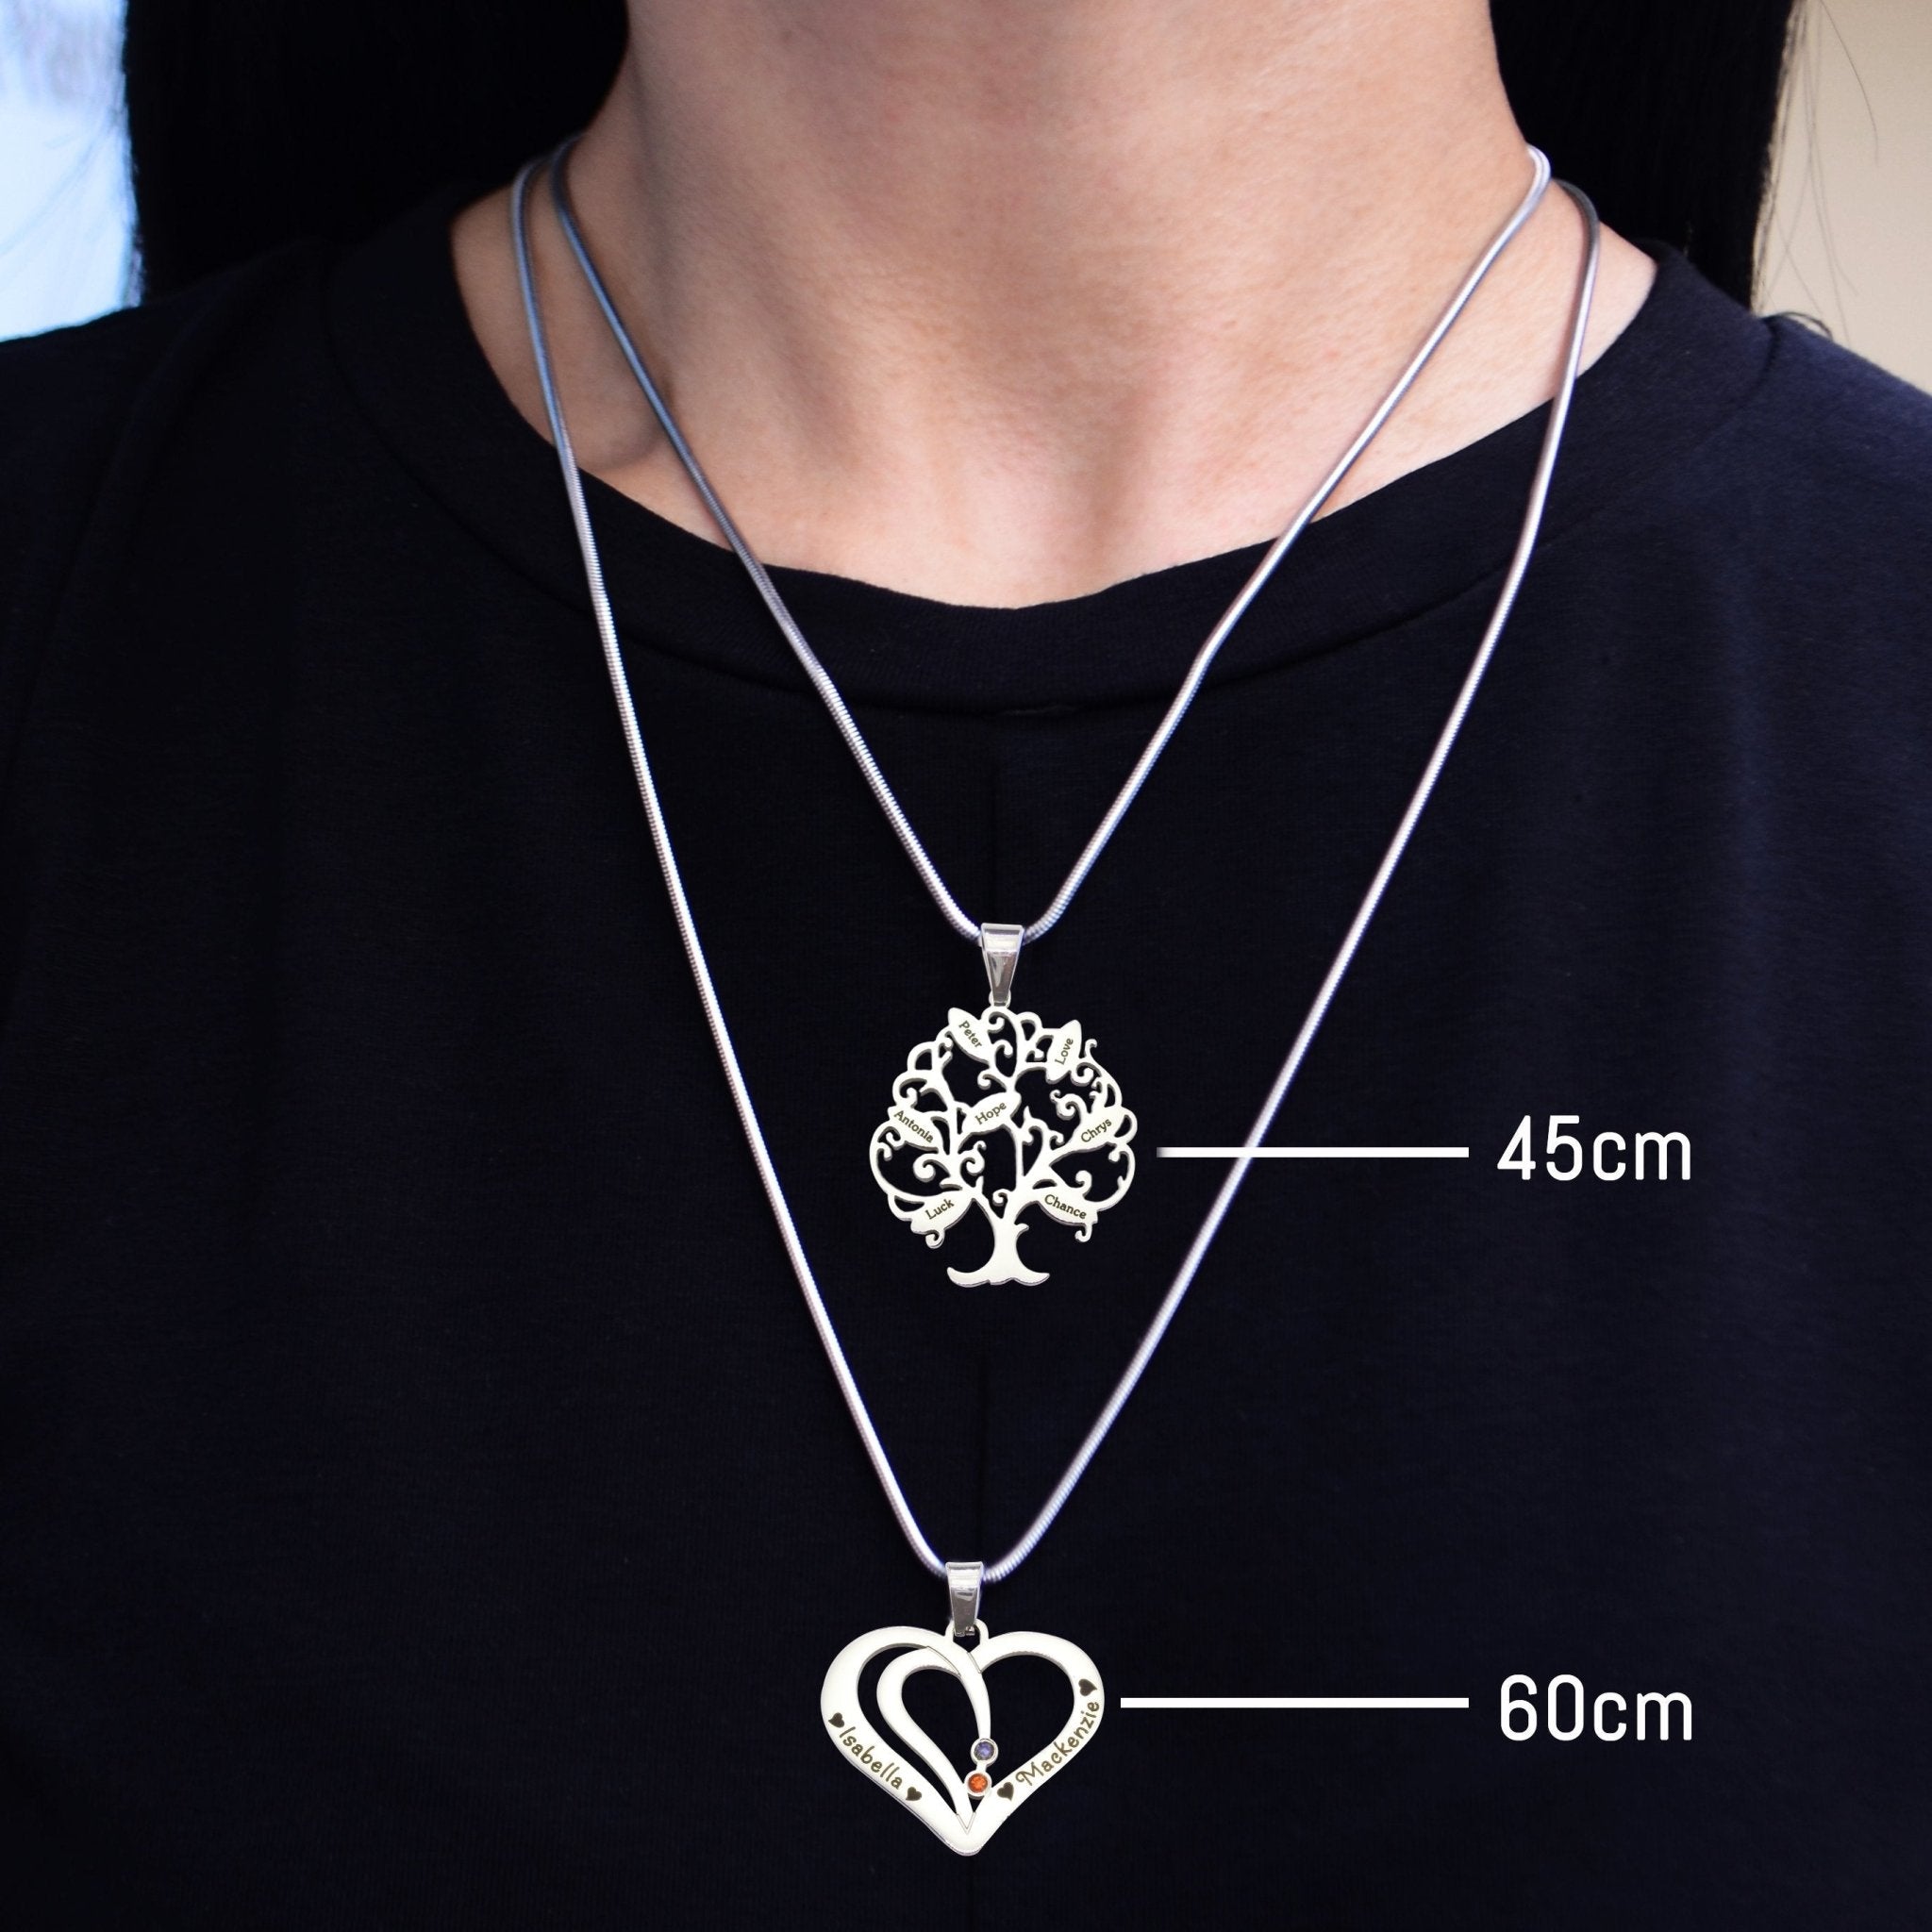 Heart Necklace - I Love You - Memorial & Cremation Jewellery by Belle Fever